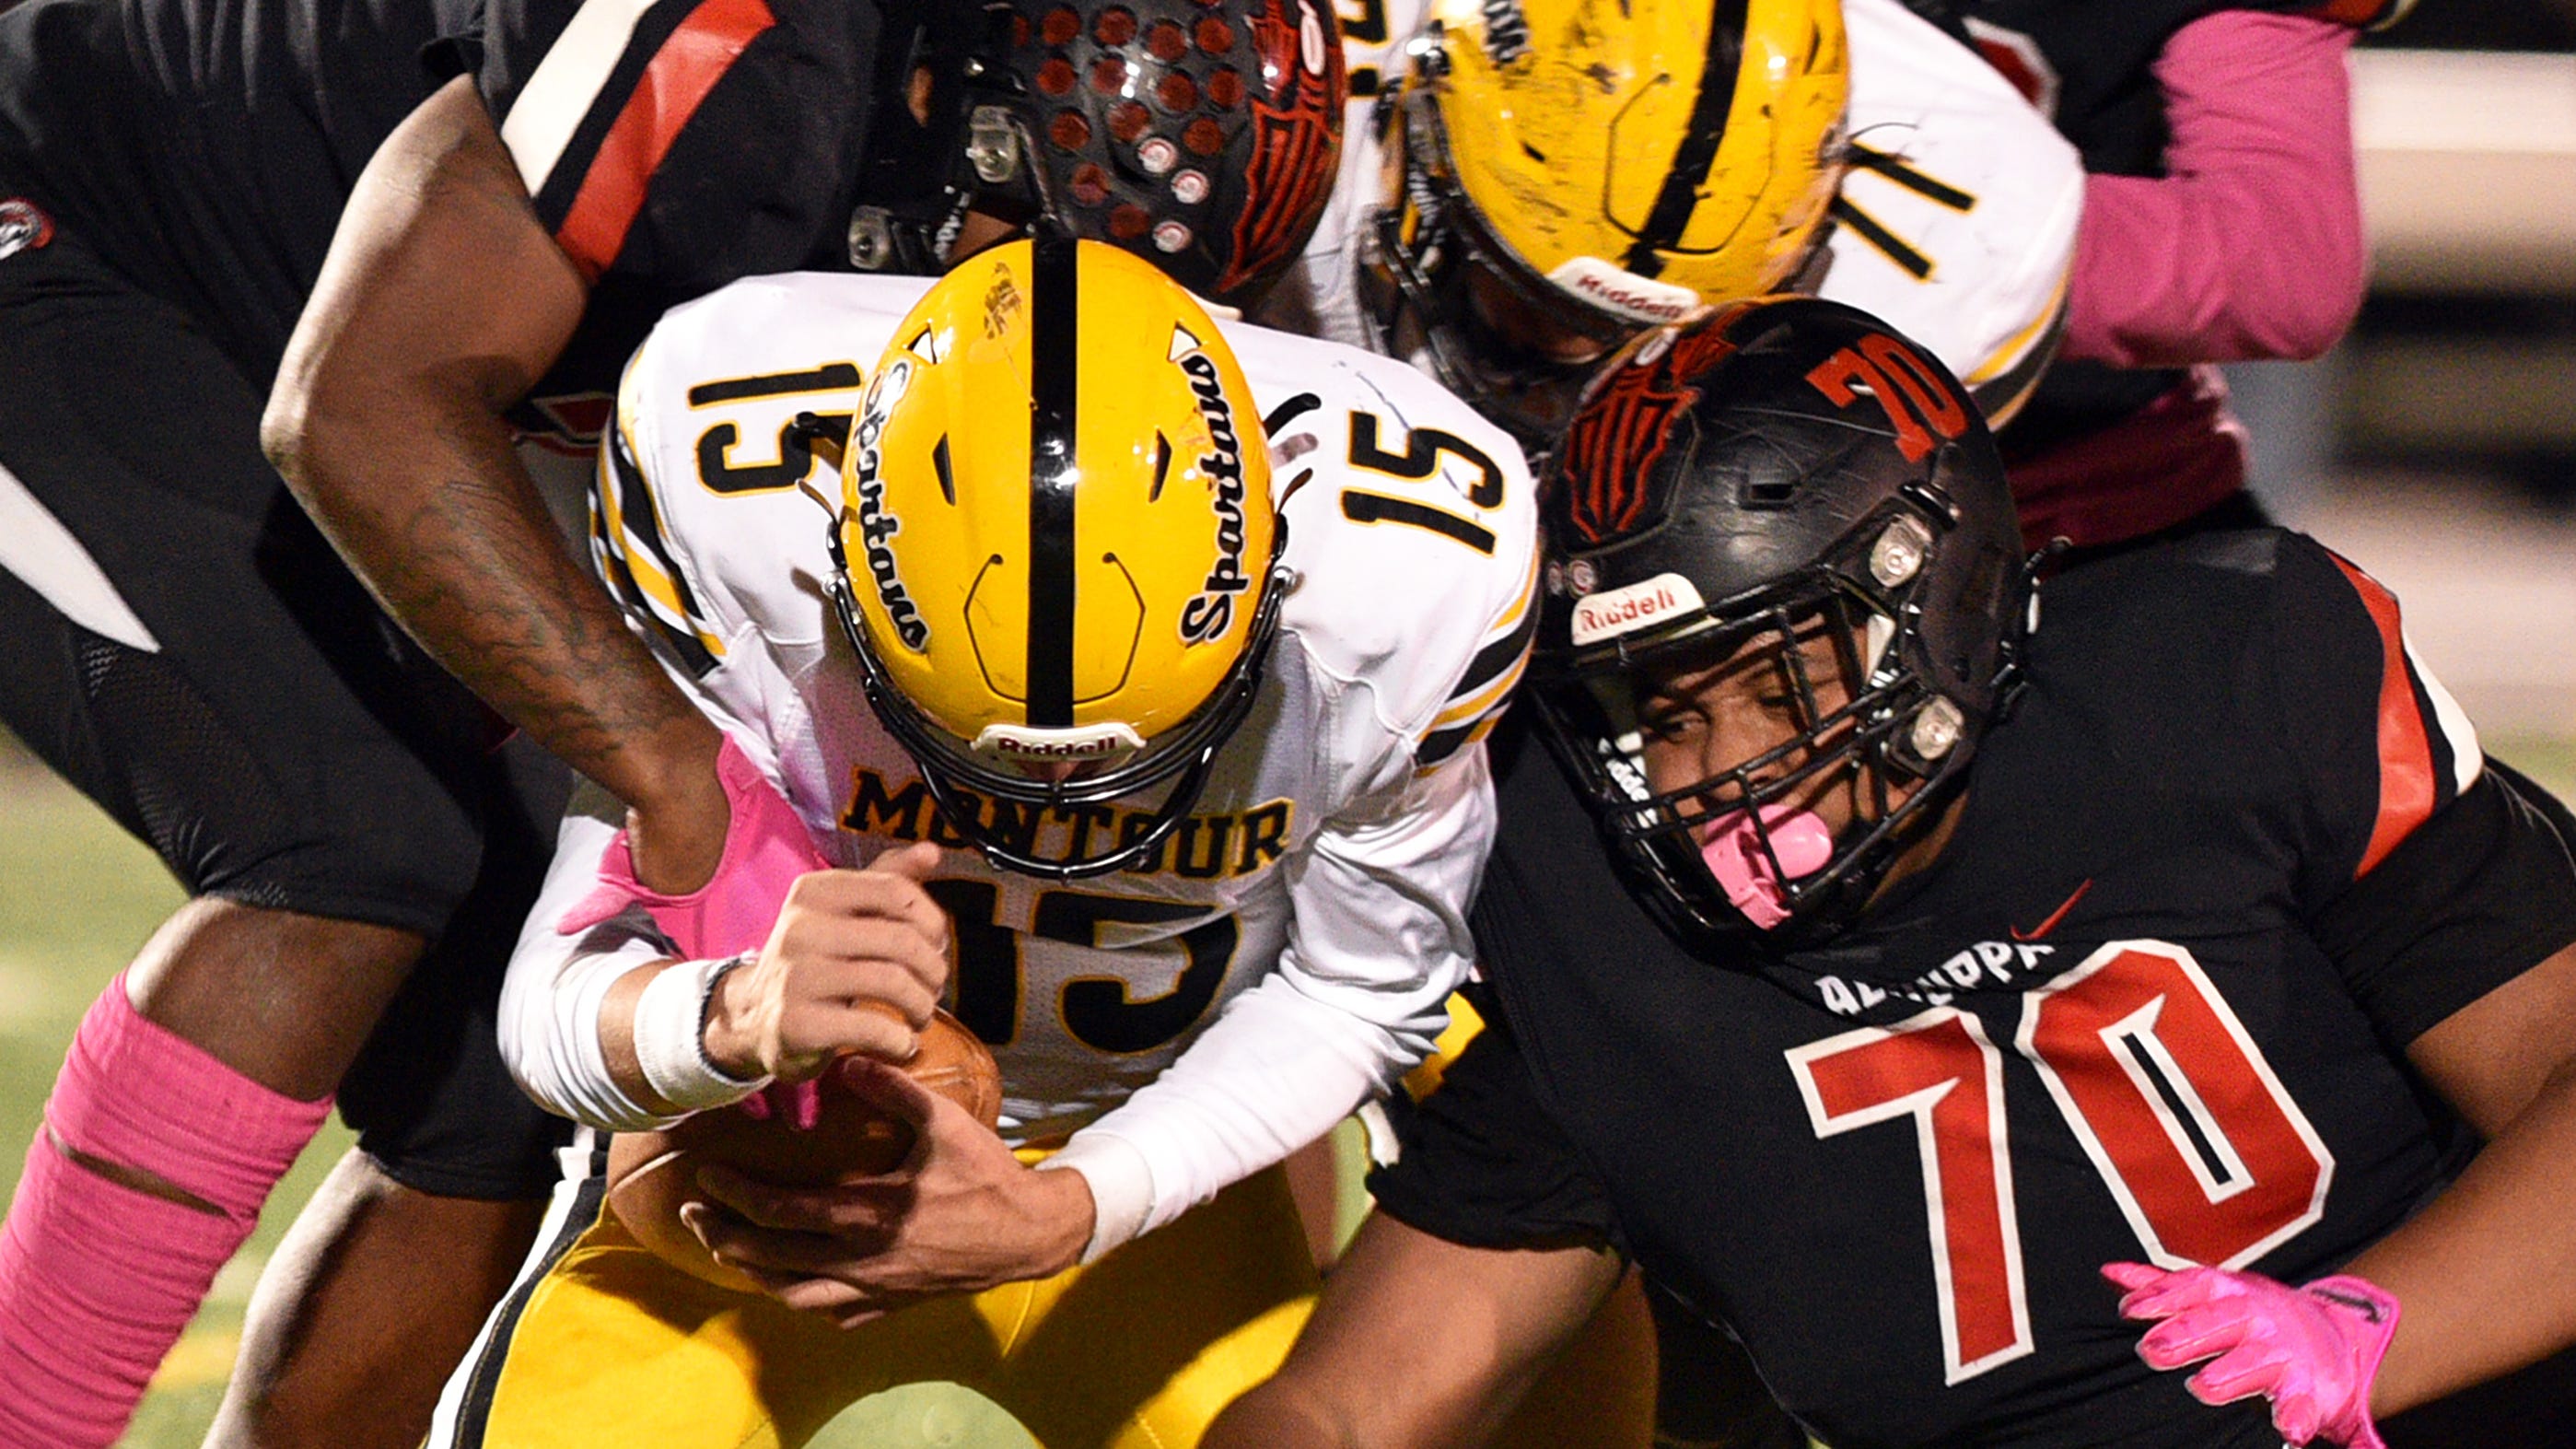 WPIAL Football Playoffs Scouting reports for the quarterfinals